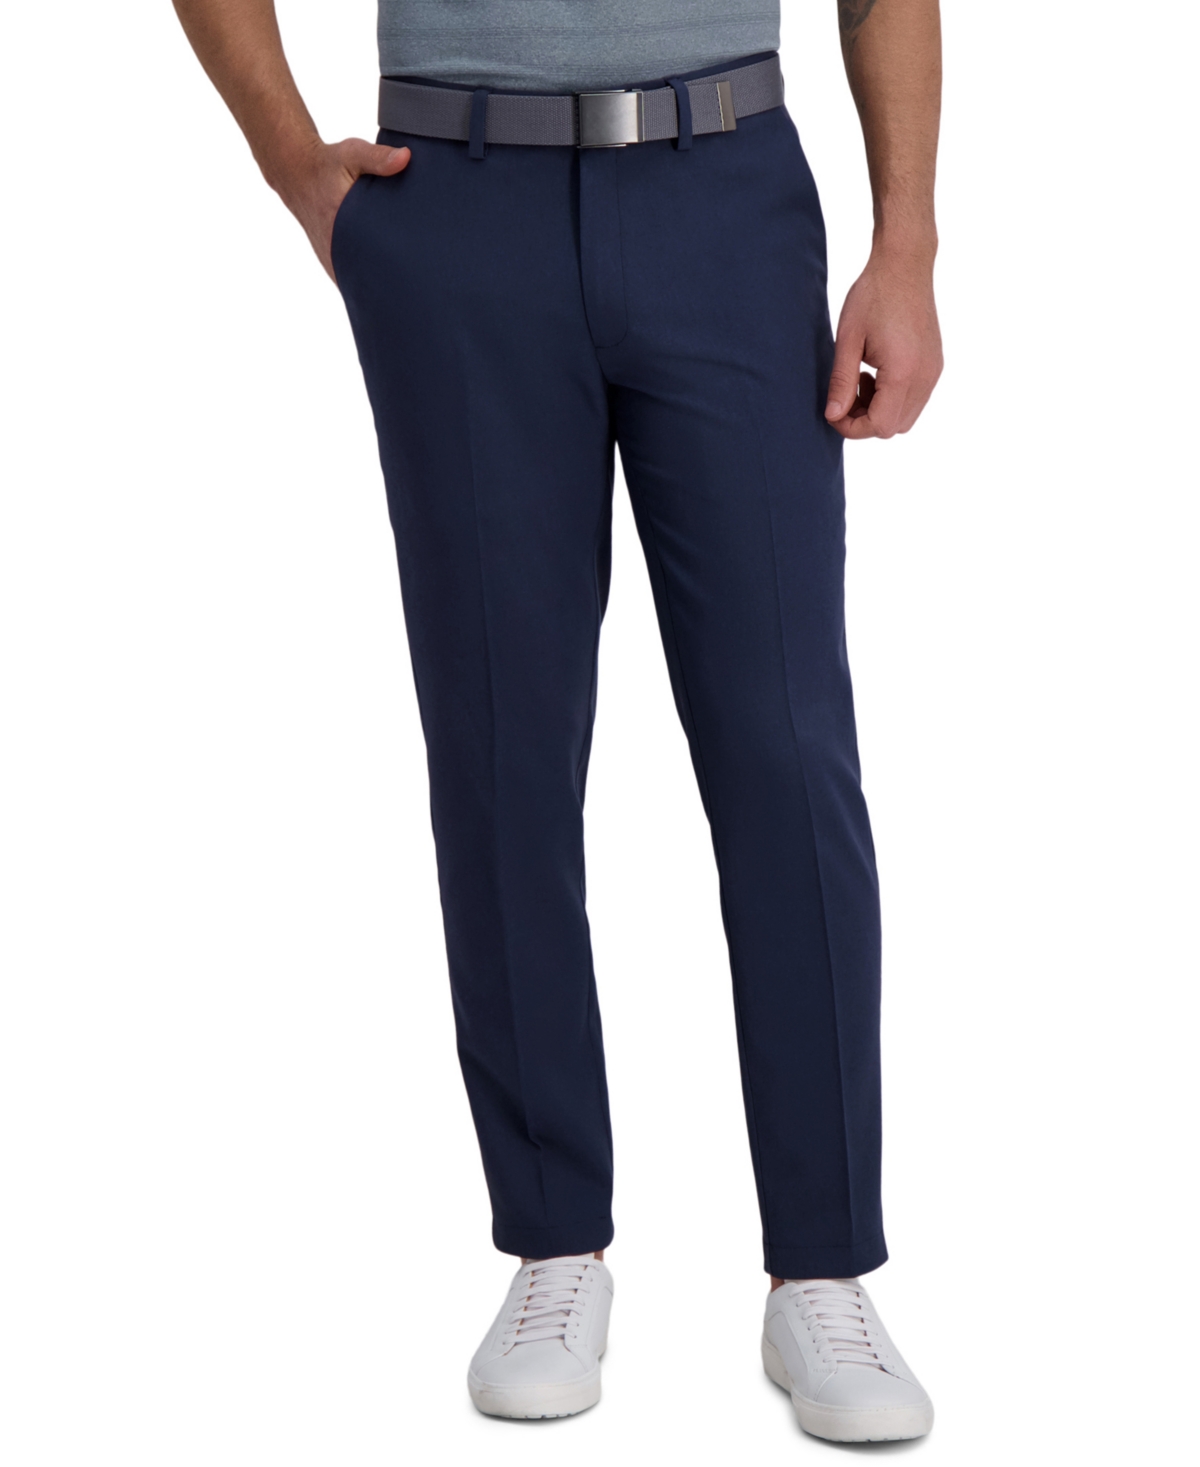 UPC 019783255460 product image for Cool Right Performance Flex Slim Fit Flat Front Pant | upcitemdb.com